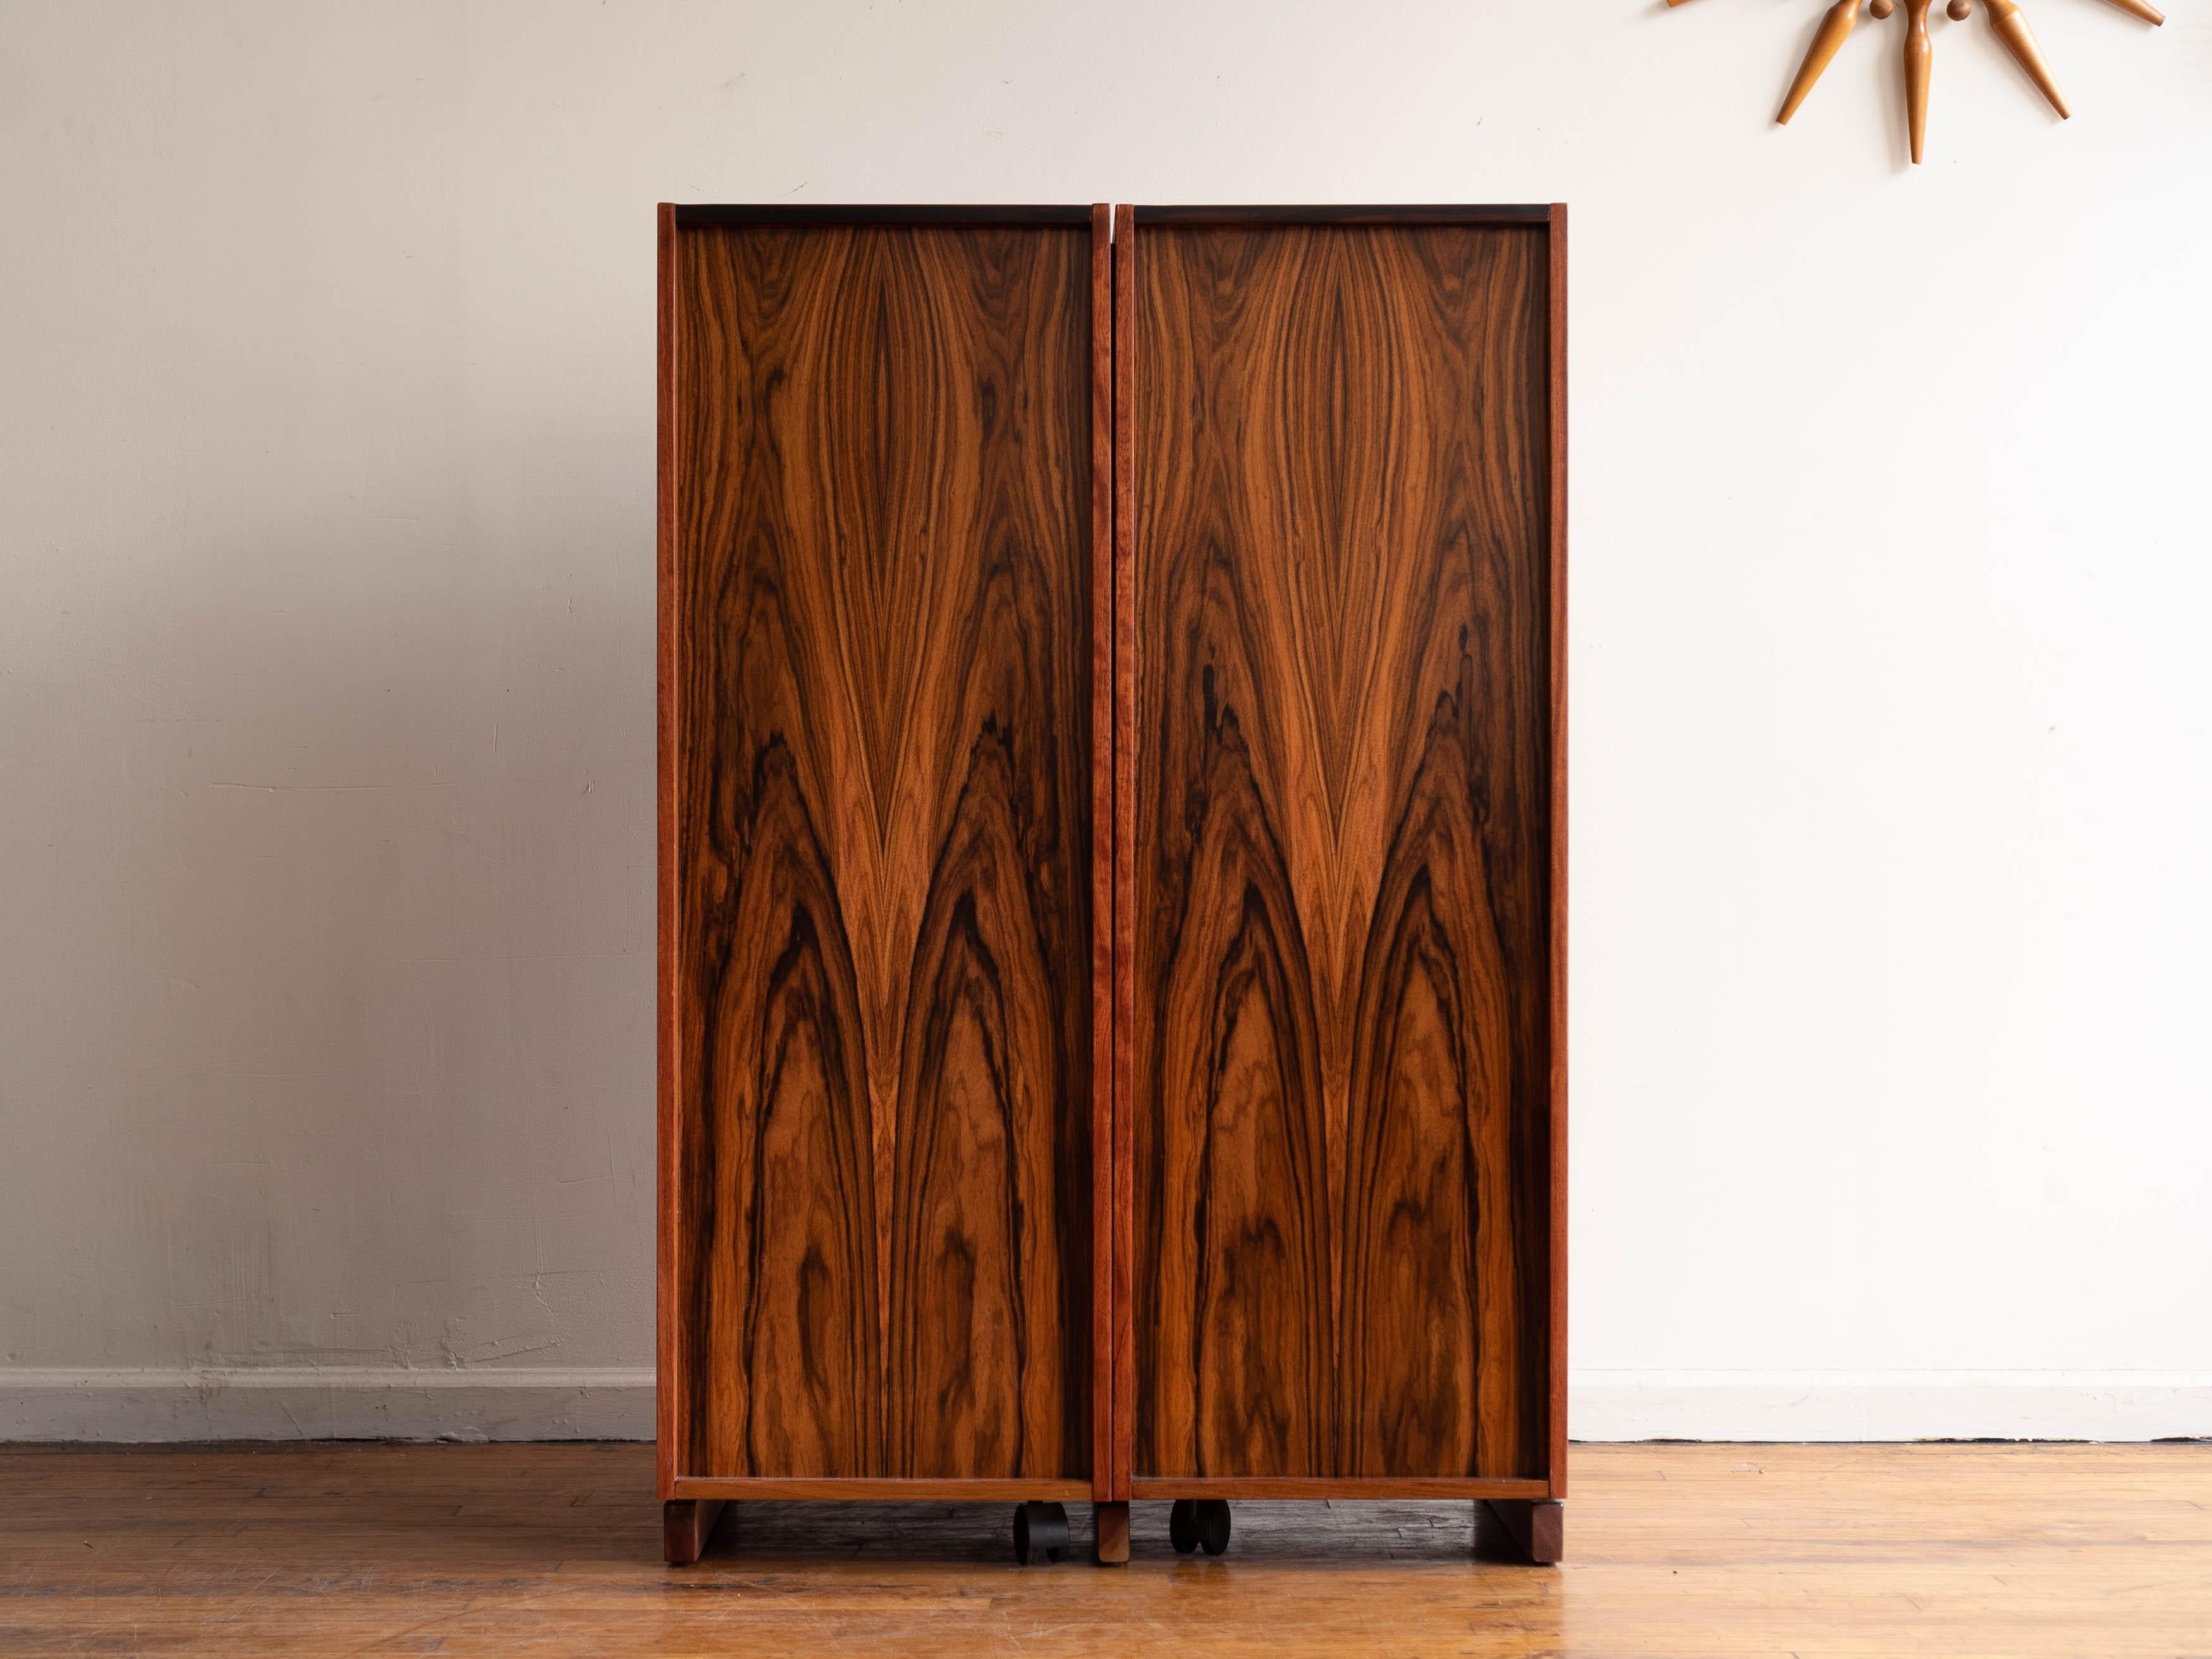 Measures: 31.5” x 20.5” x 48”H; 60” x 29.5”D when open

31.5” x 20.5” x 48”H; 60” x 29.5”D when open

Ingeniously designed Danish modern rosewood cabinet whose hinged doors open to reveal a full work station. Features large fold out work